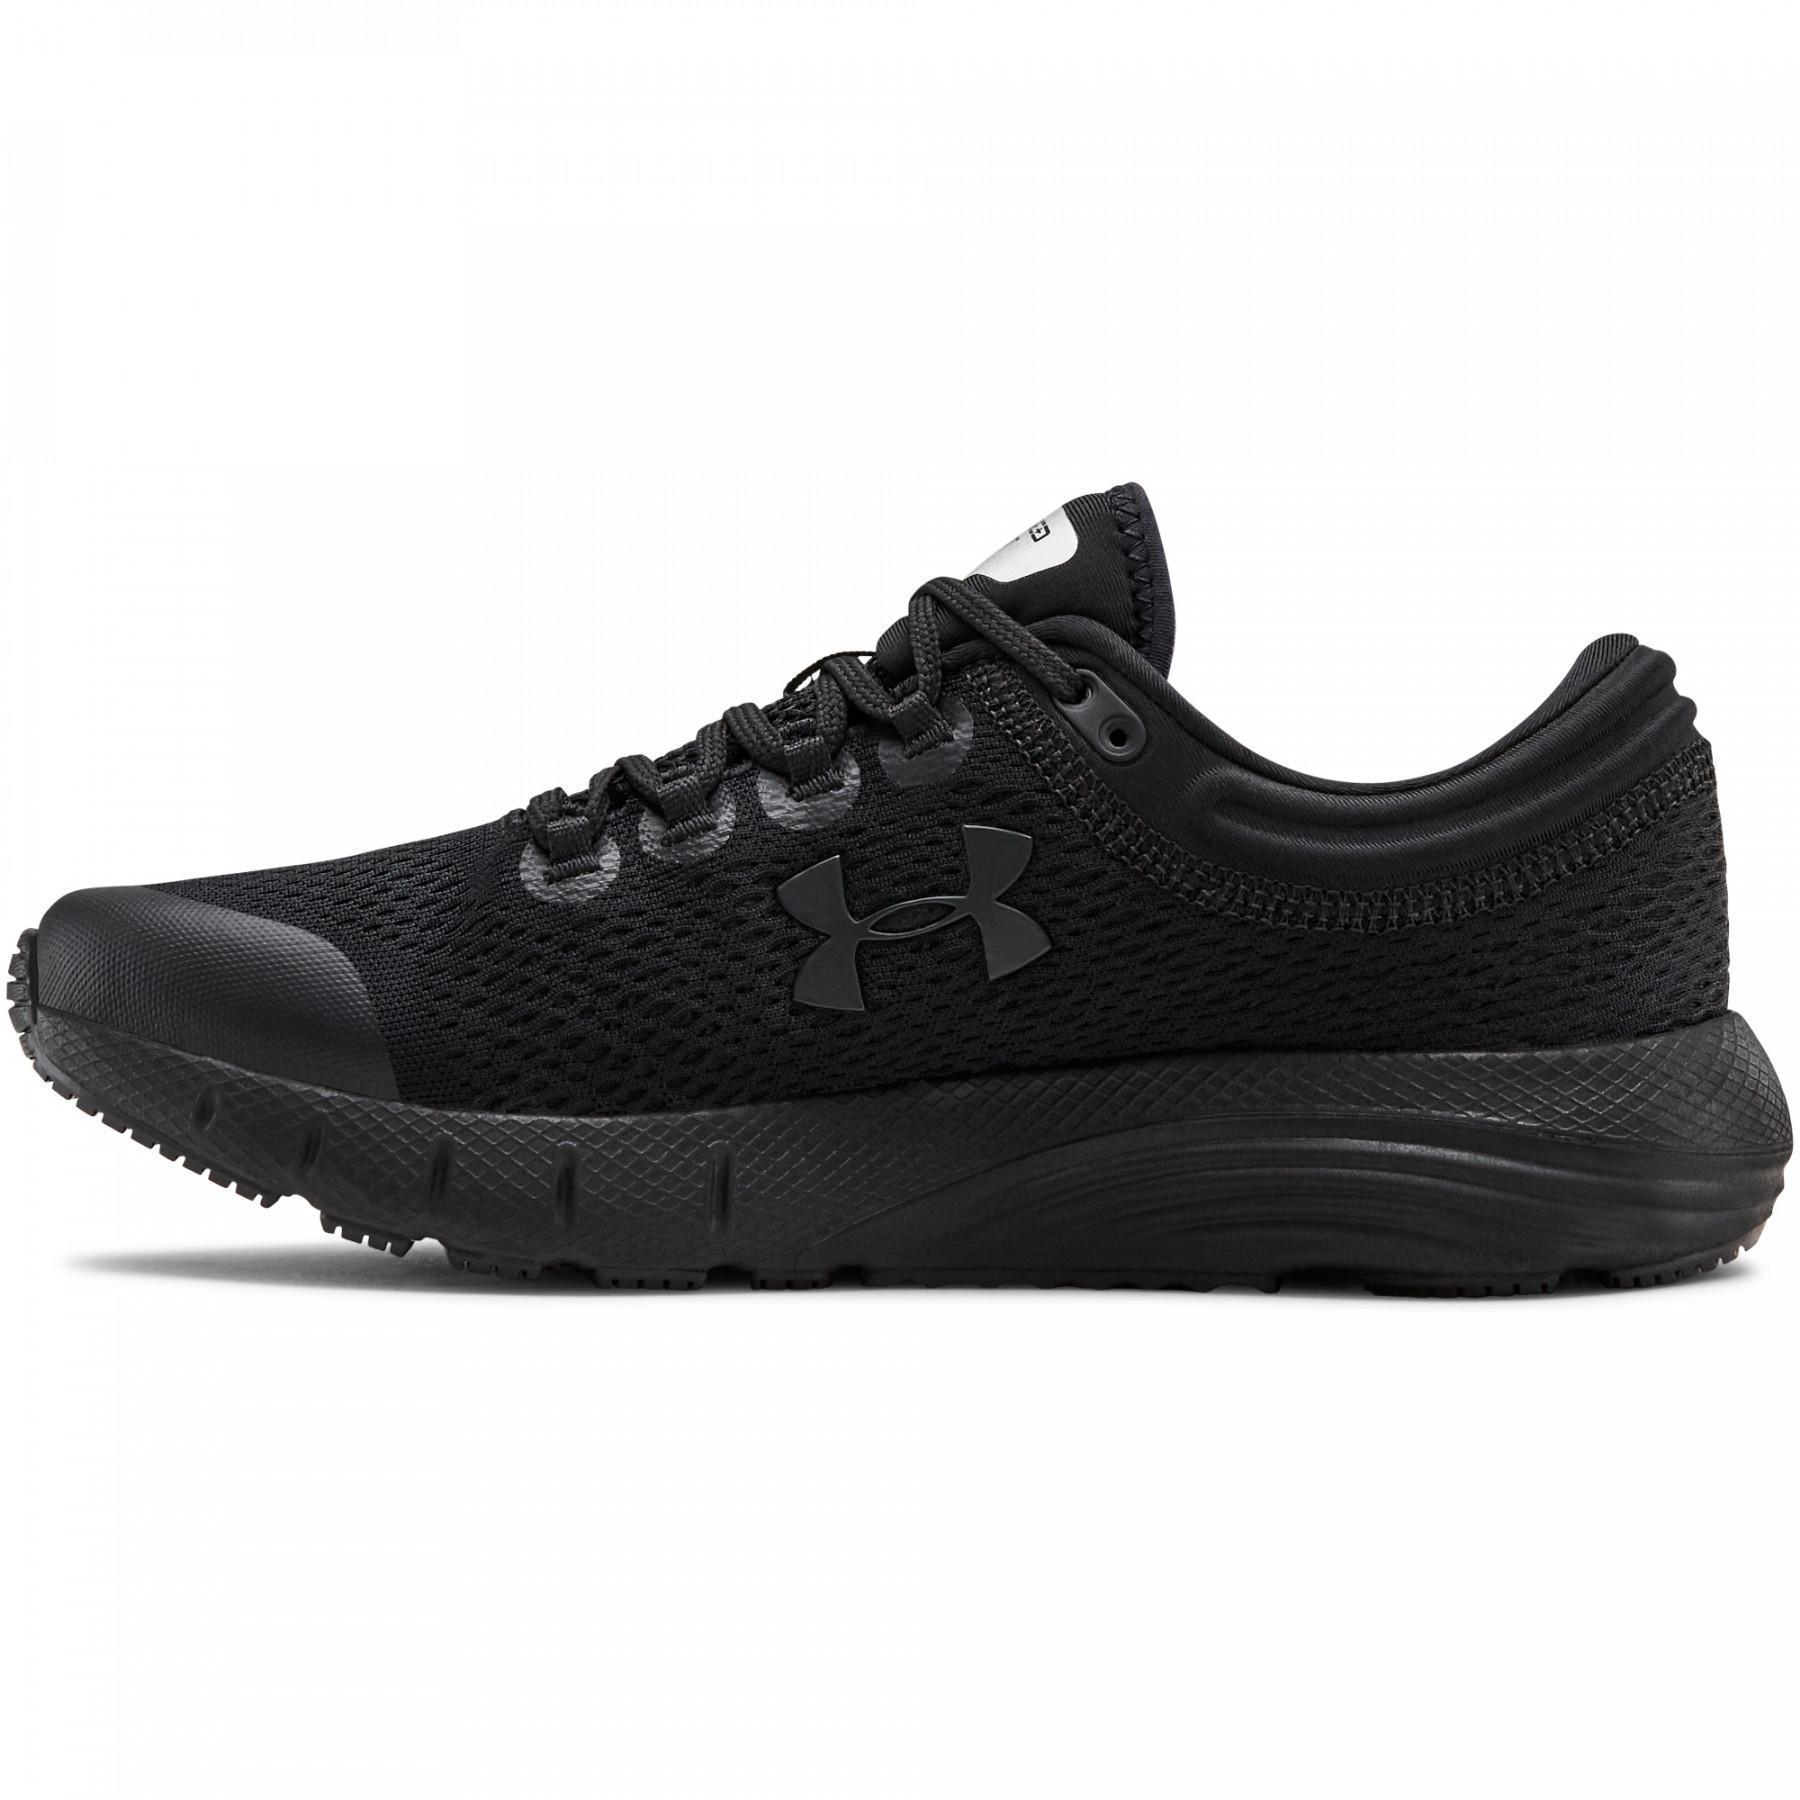 Chaussures de running femme Under Armour Charged Bandit 5